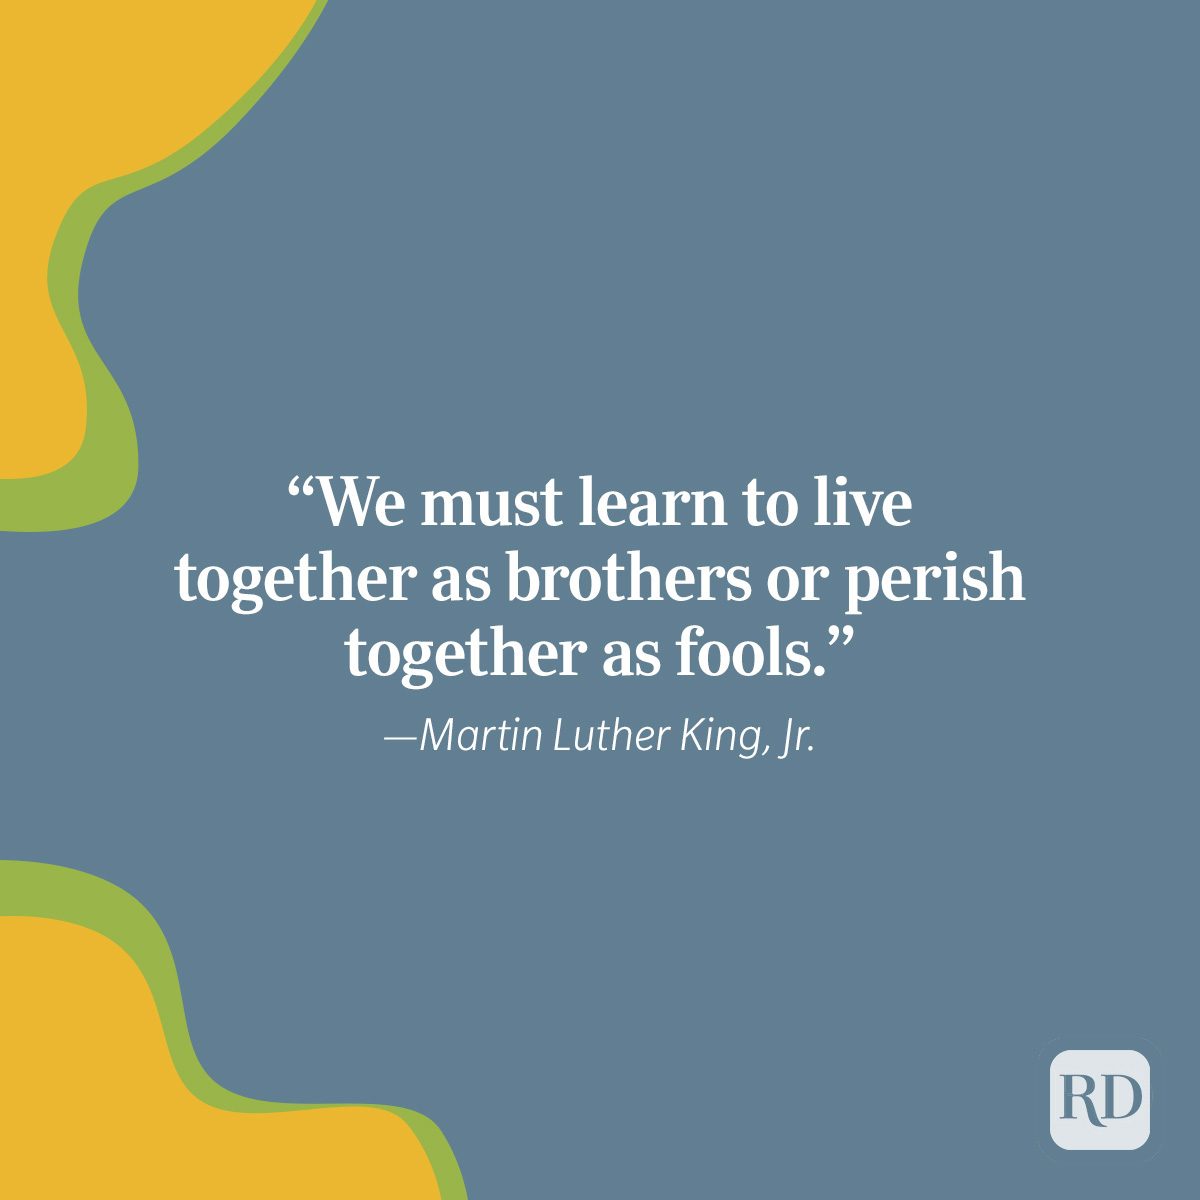 50 Inspirational Martin Luther King, Jr. Quotes